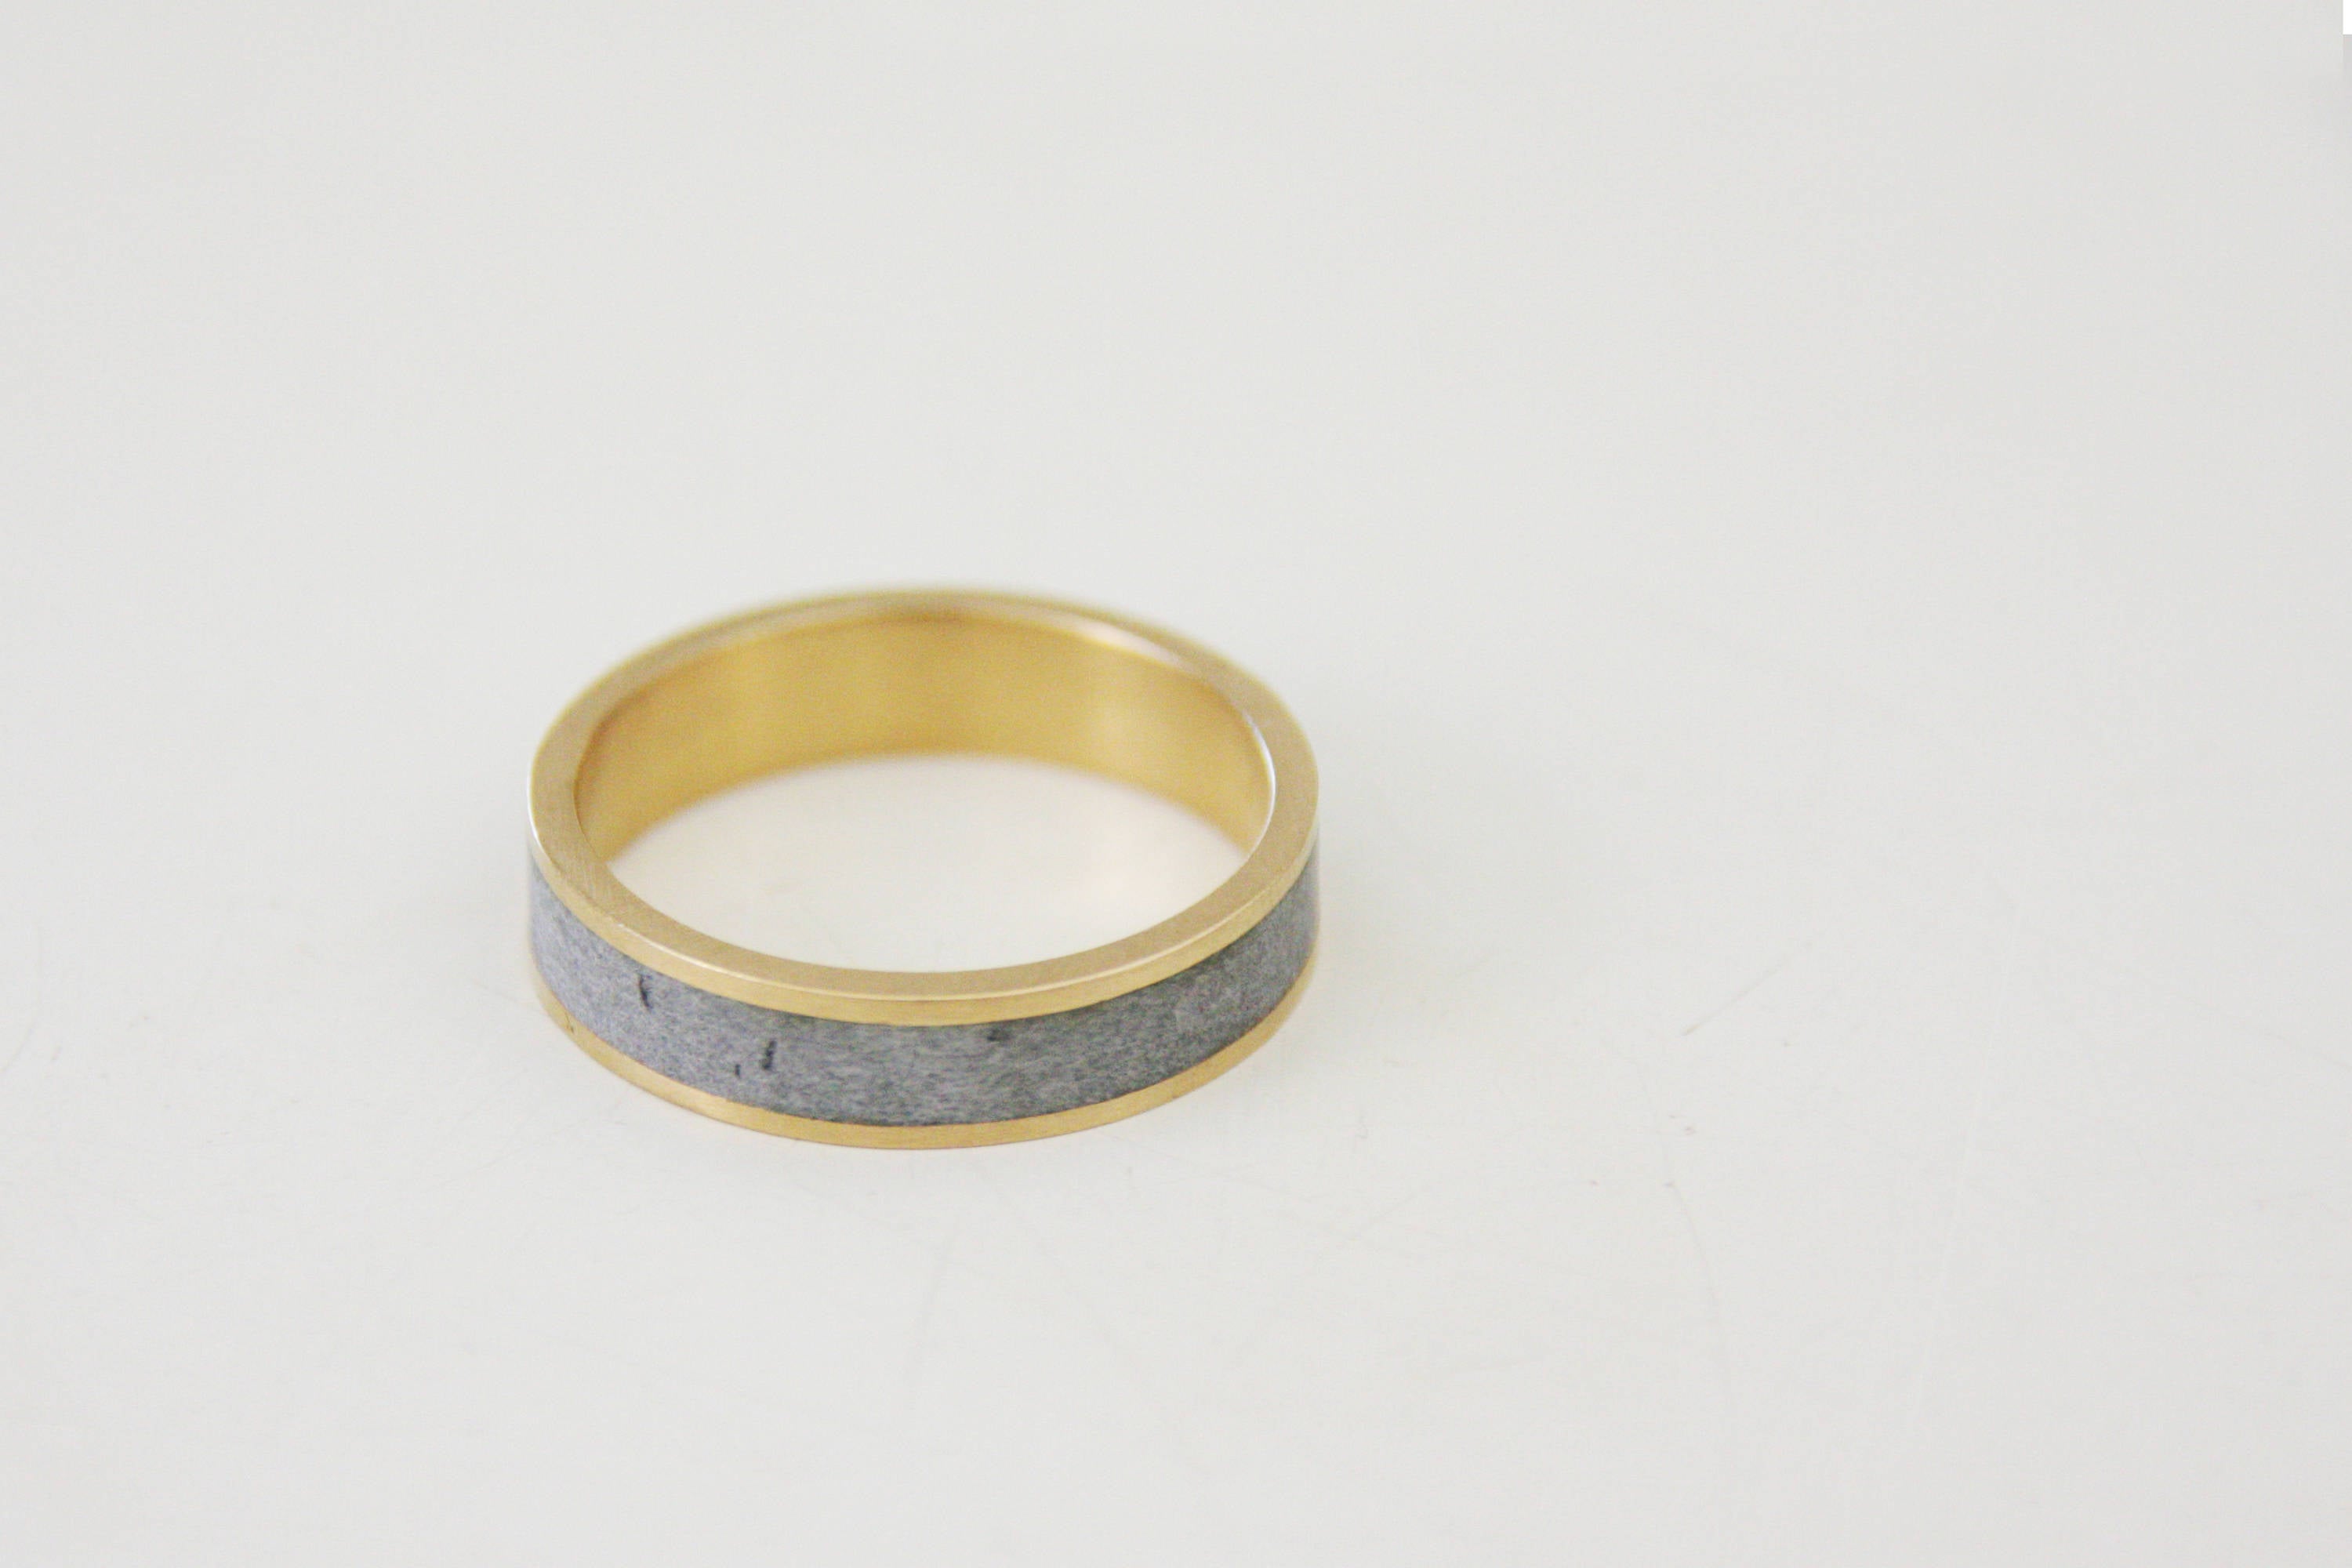 Silver and Concrete Unisex Wedding Band Ring - hs